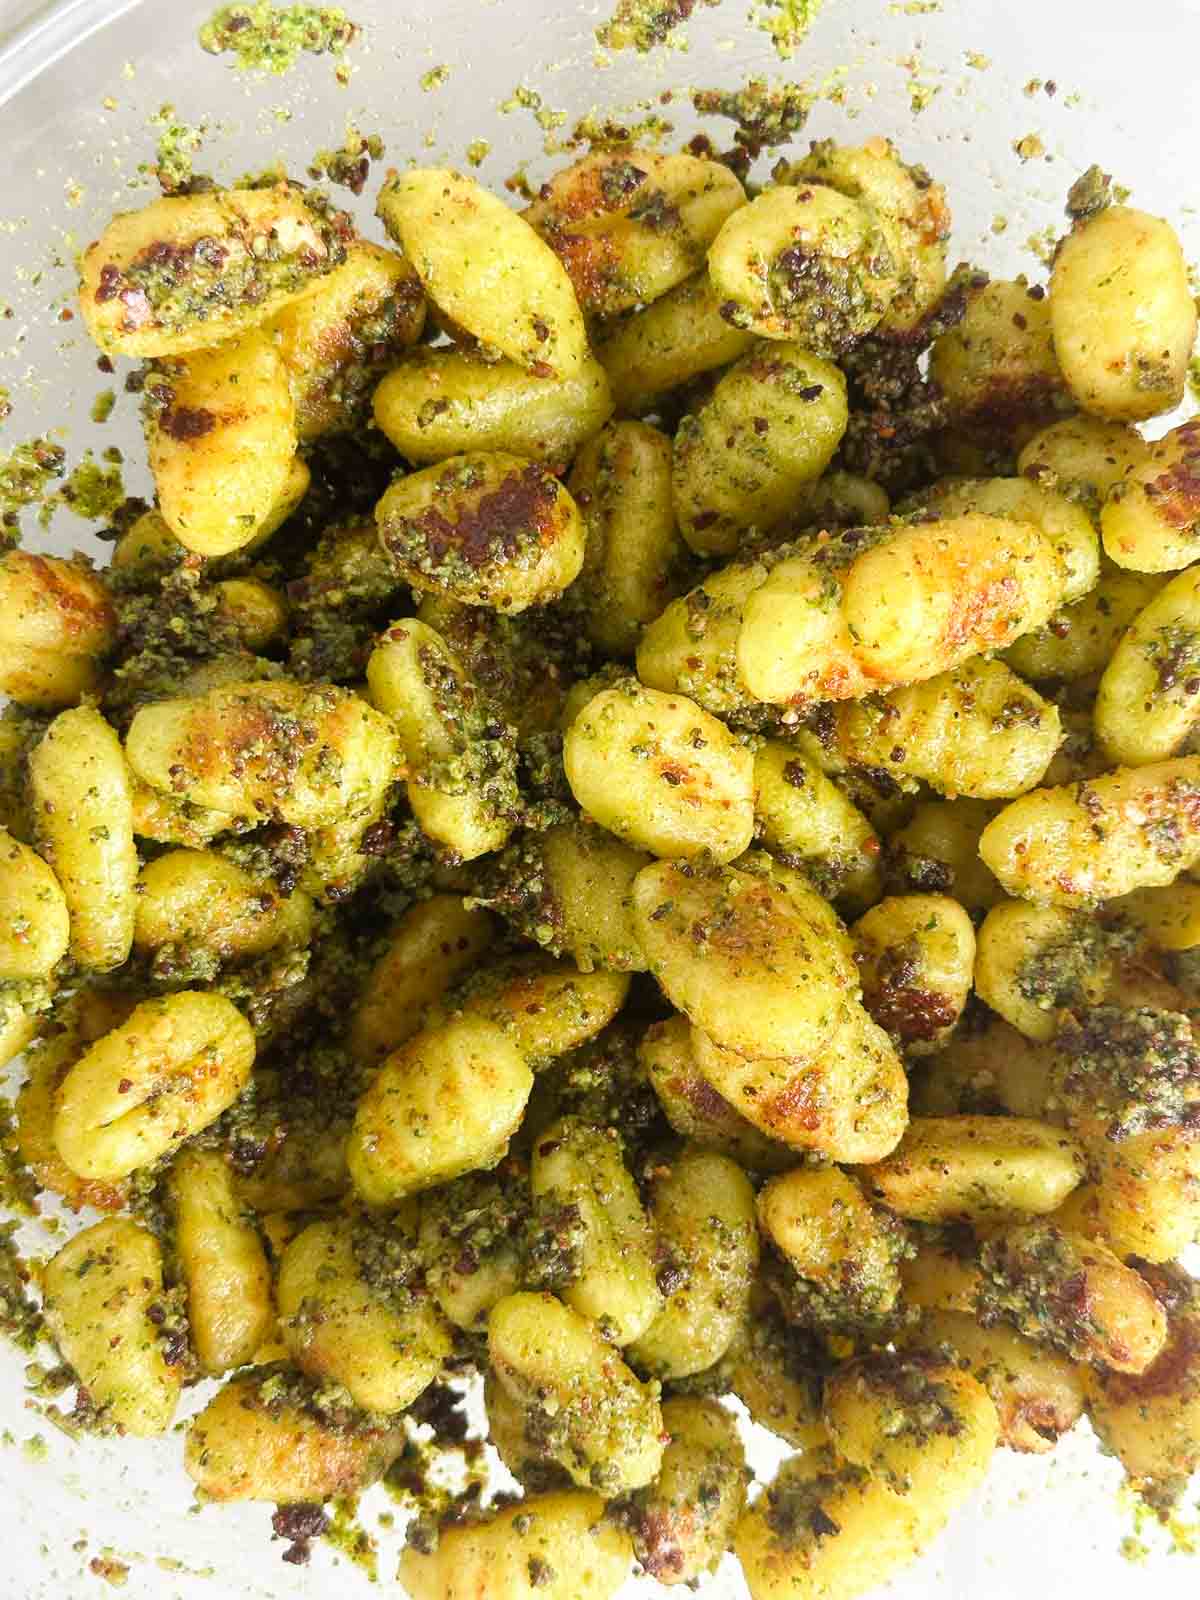 Toss the baked gnocchi with pesto sauce